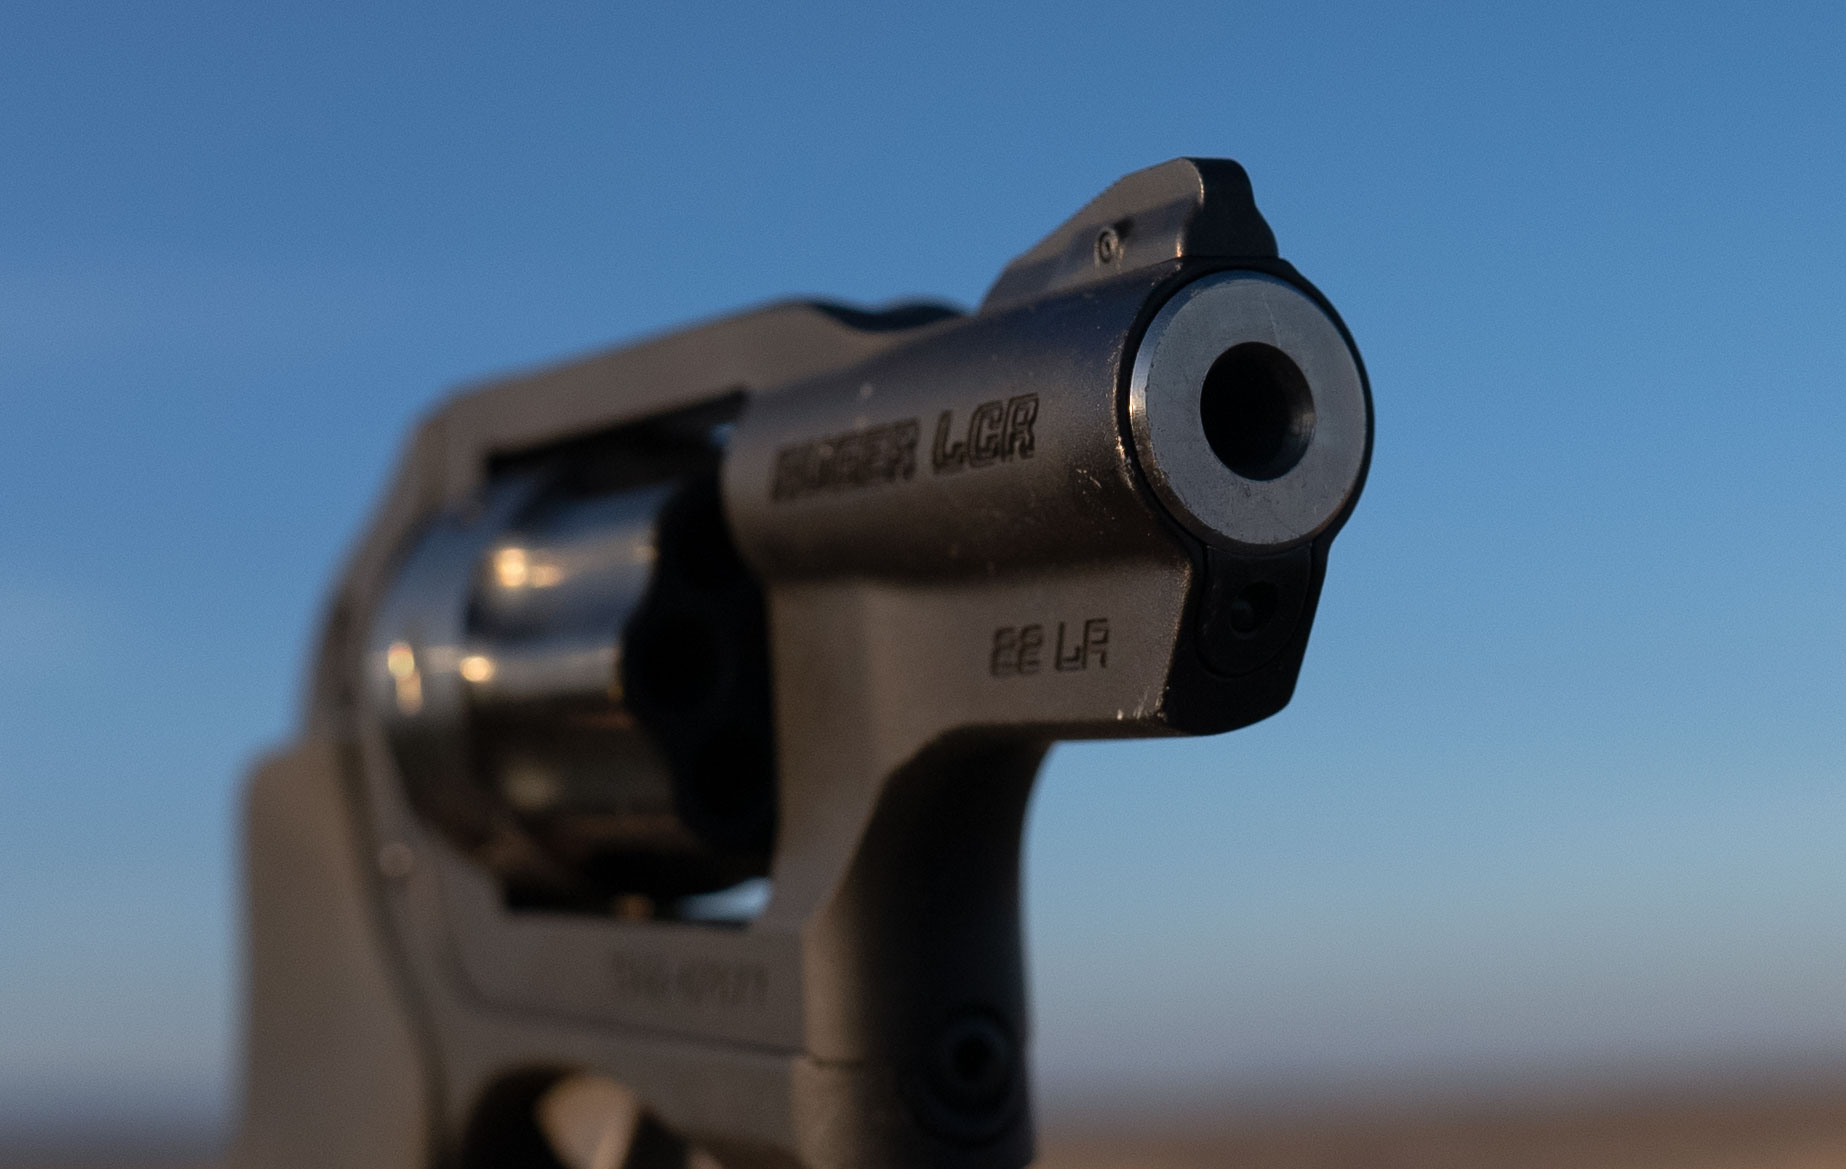 revolver muzzle and front sight